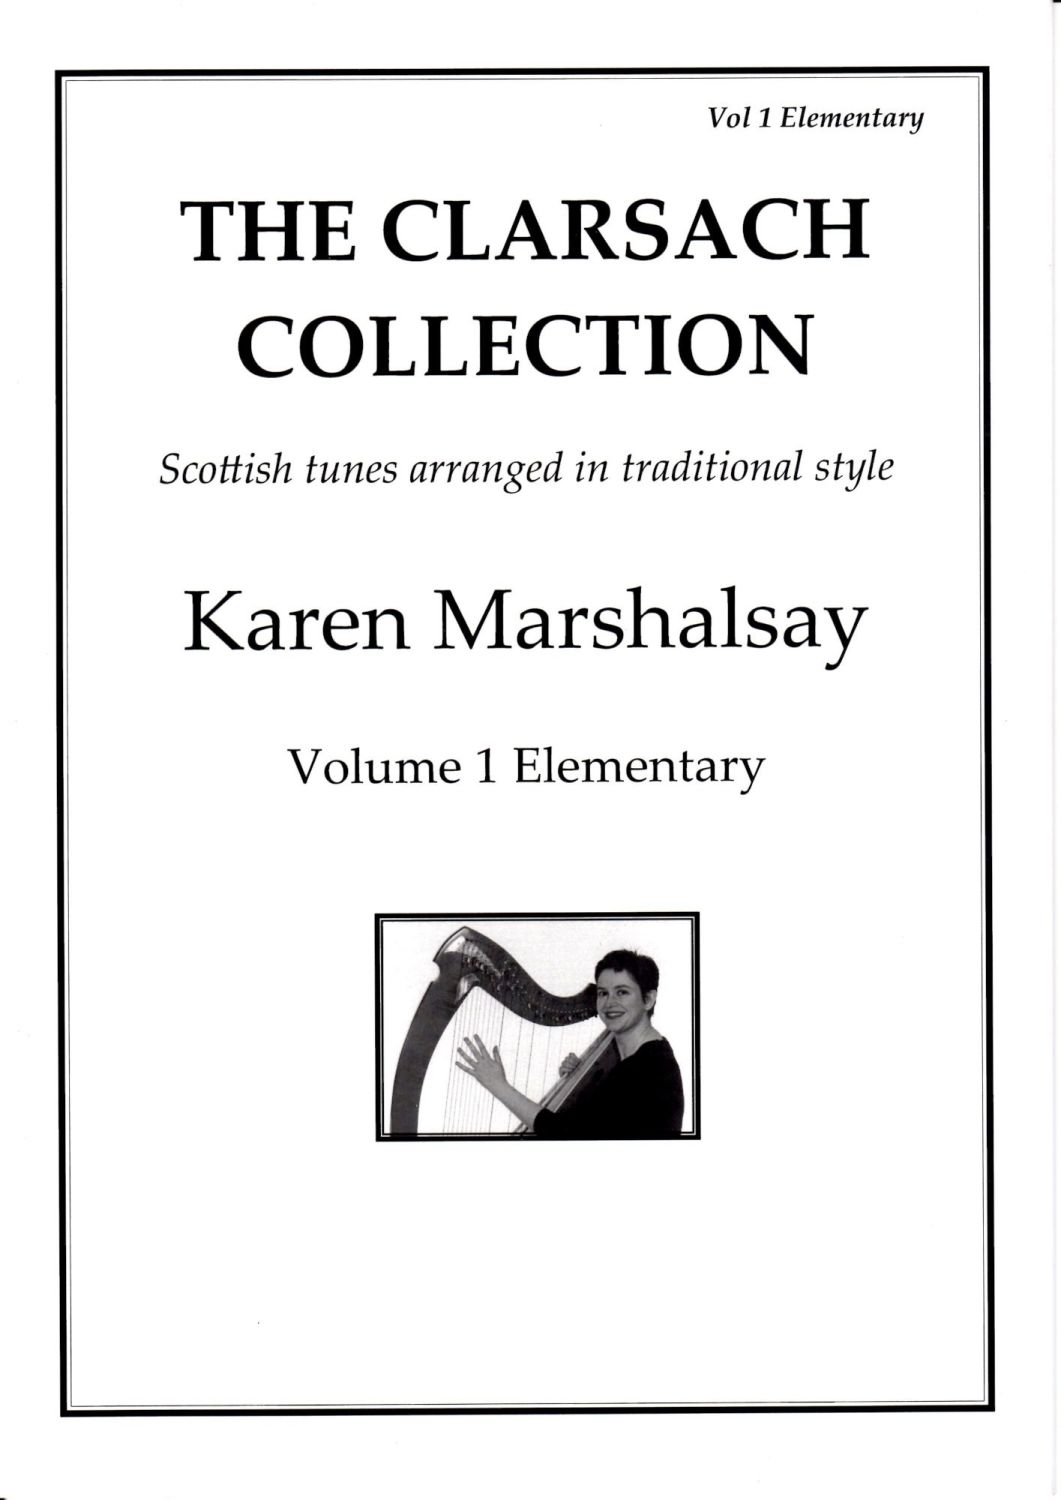 The Clarsach Collection Vol. 1 Elementary - Karen Marshalsay